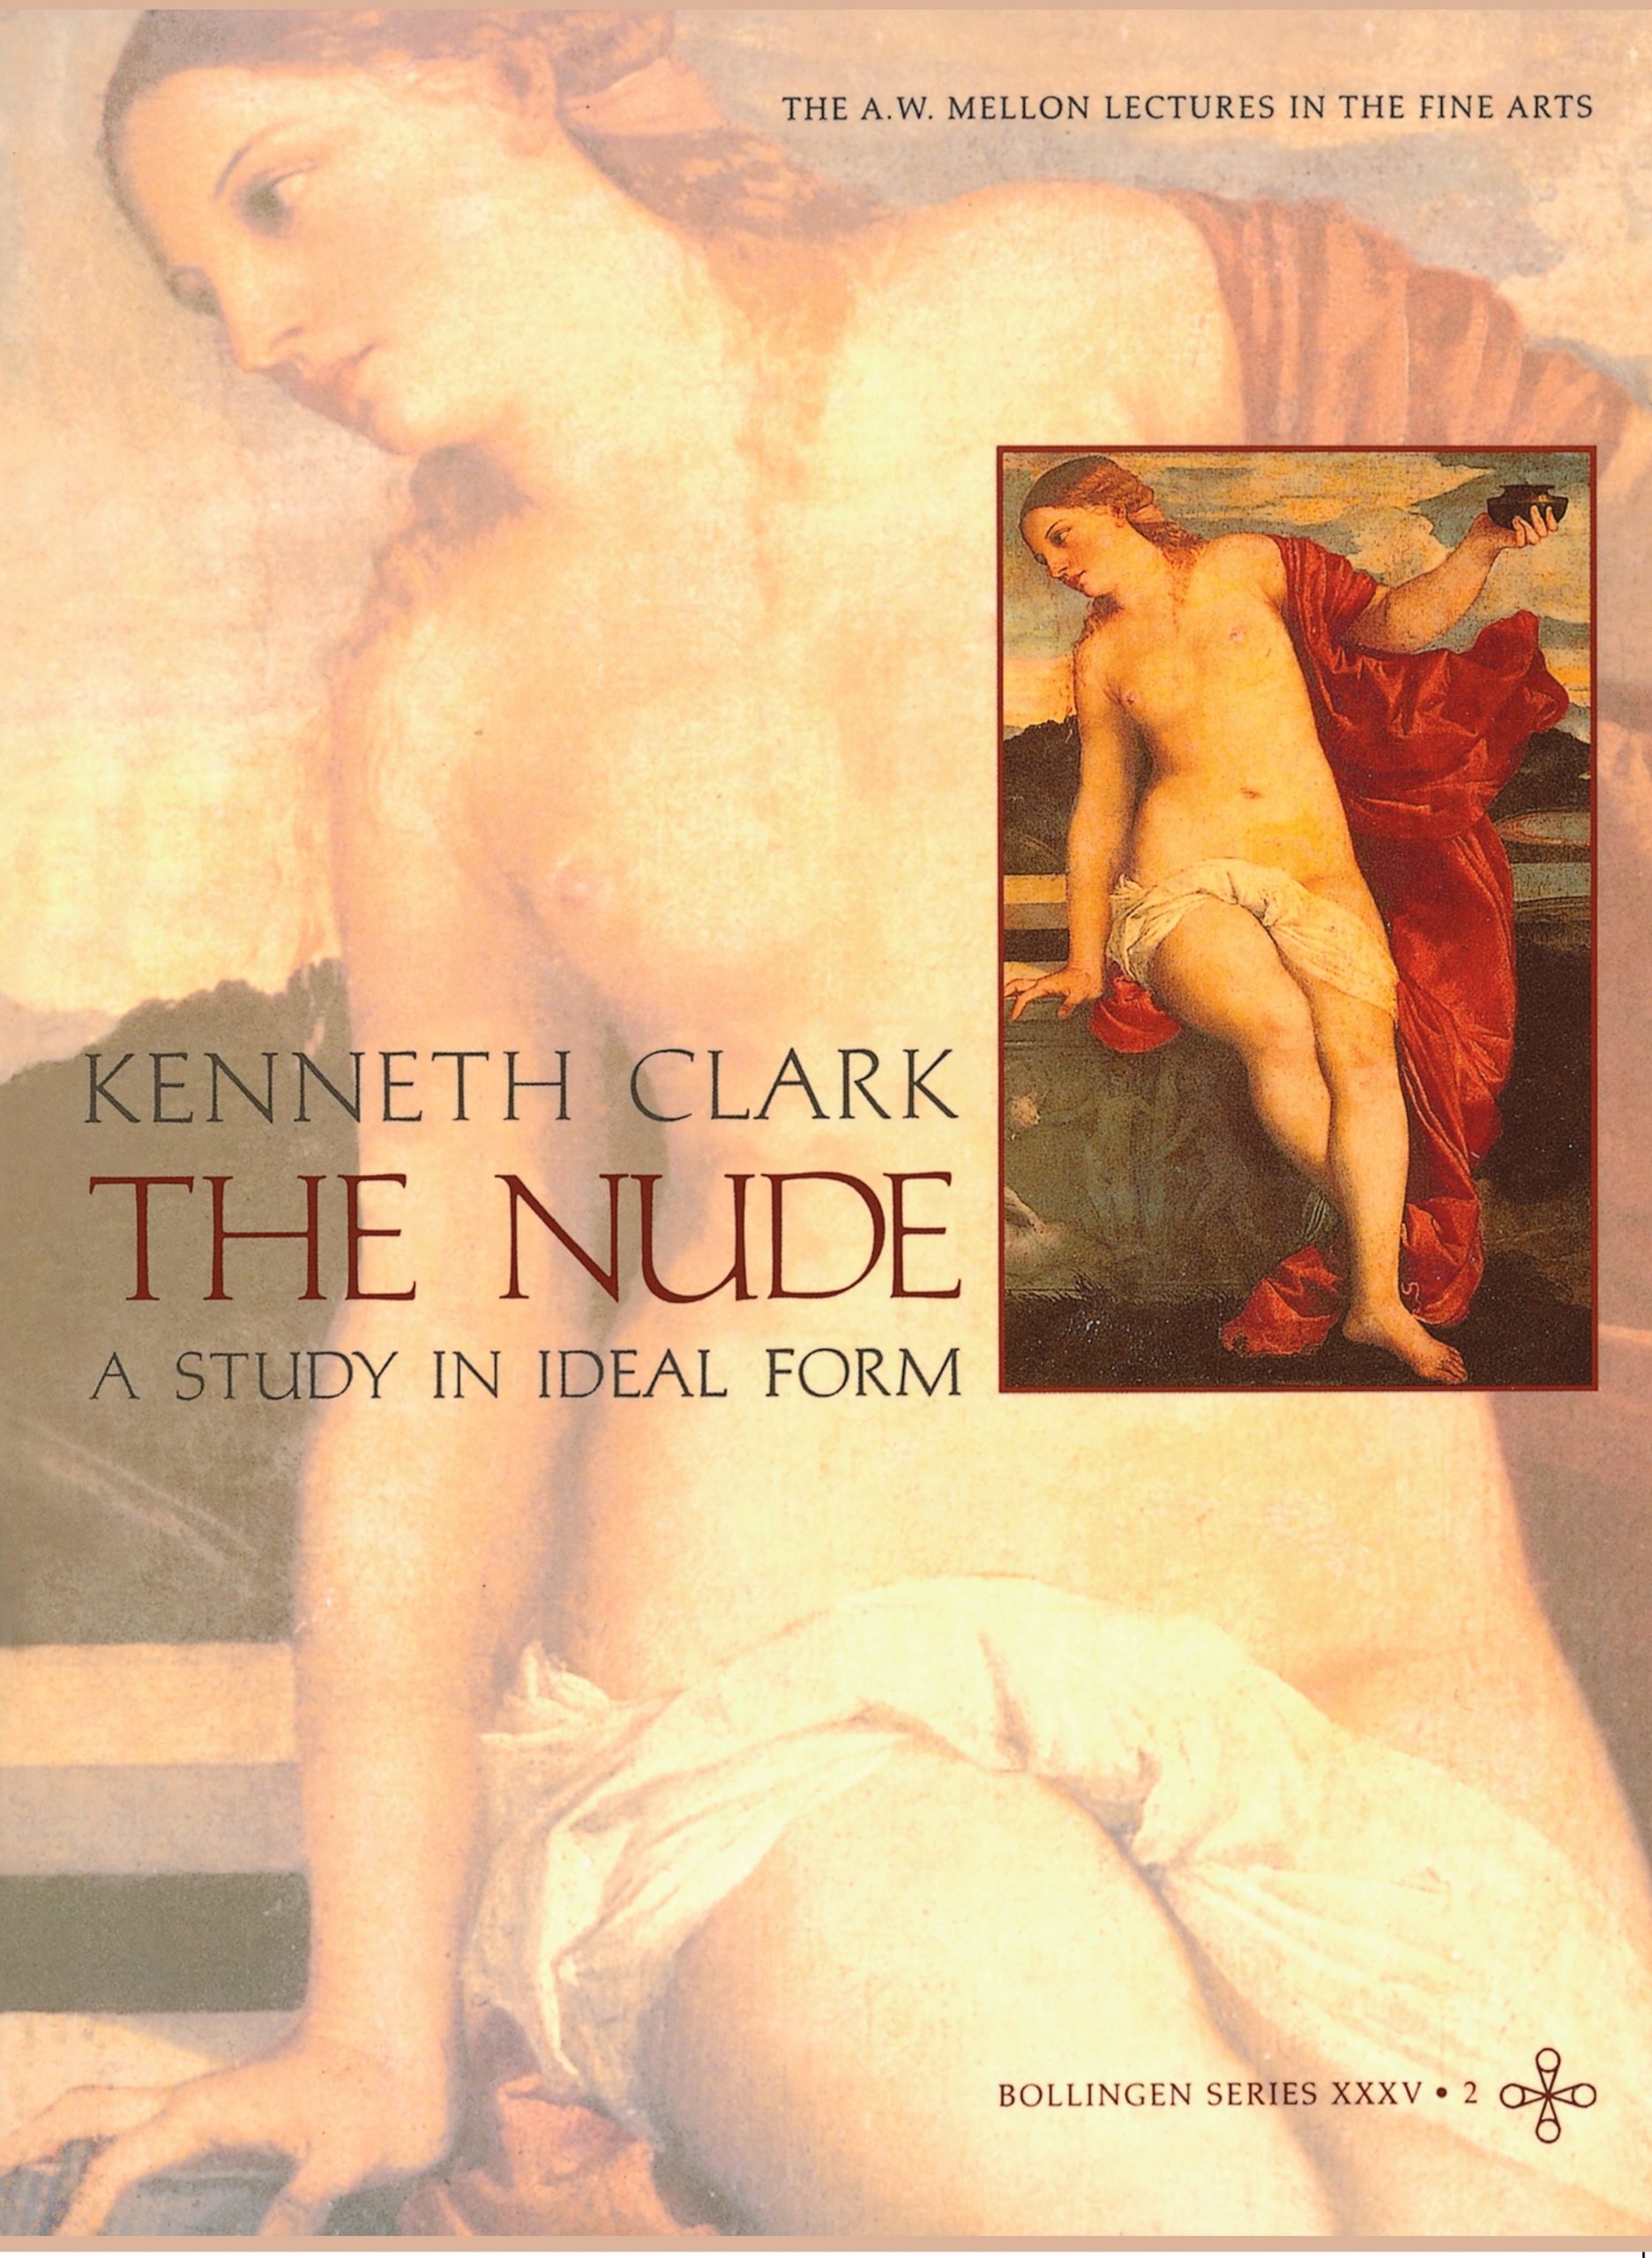 The Nude: A Study in Ideal Form by Kenneth Clark.